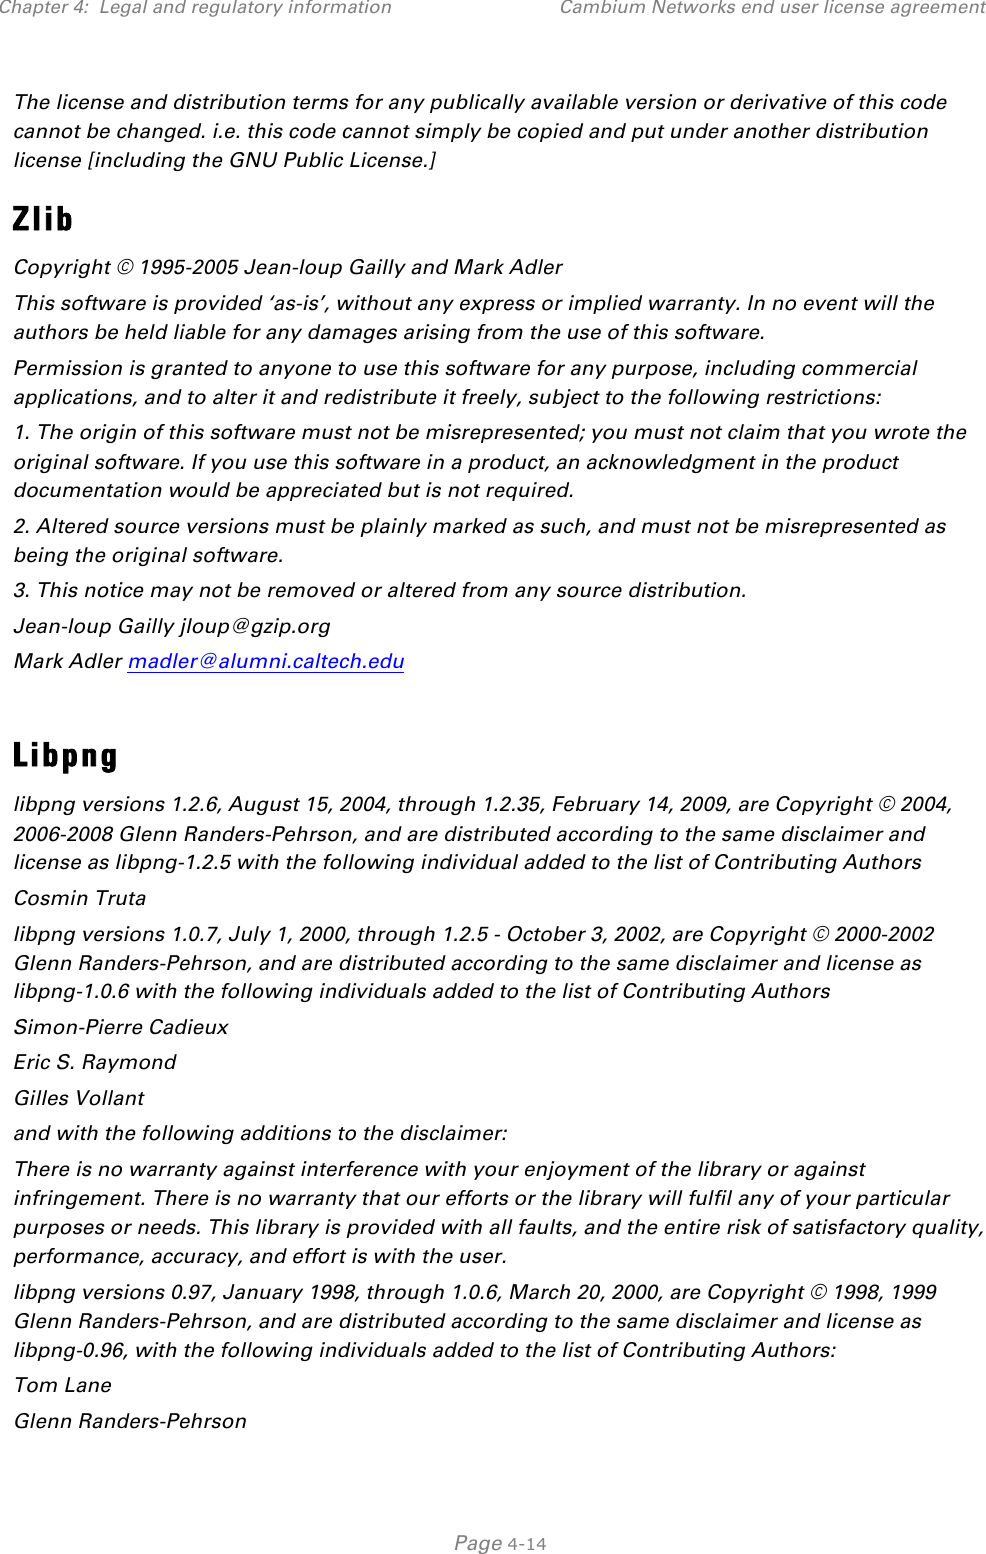 Chapter 4:  Legal and regulatory information Cambium Networks end user license agreement   Page 4-14 The license and distribution terms for any publically available version or derivative of this code cannot be changed. i.e. this code cannot simply be copied and put under another distribution license [including the GNU Public License.] Zlib Copyright © 1995-2005 Jean-loup Gailly and Mark Adler This software is provided ‘as-is’, without any express or implied warranty. In no event will the authors be held liable for any damages arising from the use of this software. Permission is granted to anyone to use this software for any purpose, including commercial applications, and to alter it and redistribute it freely, subject to the following restrictions: 1. The origin of this software must not be misrepresented; you must not claim that you wrote the original software. If you use this software in a product, an acknowledgment in the product documentation would be appreciated but is not required. 2. Altered source versions must be plainly marked as such, and must not be misrepresented as being the original software. 3. This notice may not be removed or altered from any source distribution. Jean-loup Gailly jloup@gzip.org Mark Adler madler@alumni.caltech.edu  Libpng libpng versions 1.2.6, August 15, 2004, through 1.2.35, February 14, 2009, are Copyright © 2004, 2006-2008 Glenn Randers-Pehrson, and are distributed according to the same disclaimer and license as libpng-1.2.5 with the following individual added to the list of Contributing Authors Cosmin Truta libpng versions 1.0.7, July 1, 2000, through 1.2.5 - October 3, 2002, are Copyright © 2000-2002 Glenn Randers-Pehrson, and are distributed according to the same disclaimer and license as libpng-1.0.6 with the following individuals added to the list of Contributing Authors Simon-Pierre Cadieux Eric S. Raymond Gilles Vollant and with the following additions to the disclaimer: There is no warranty against interference with your enjoyment of the library or against infringement. There is no warranty that our efforts or the library will fulfil any of your particular purposes or needs. This library is provided with all faults, and the entire risk of satisfactory quality, performance, accuracy, and effort is with the user. libpng versions 0.97, January 1998, through 1.0.6, March 20, 2000, are Copyright © 1998, 1999 Glenn Randers-Pehrson, and are distributed according to the same disclaimer and license as libpng-0.96, with the following individuals added to the list of Contributing Authors: Tom Lane Glenn Randers-Pehrson 